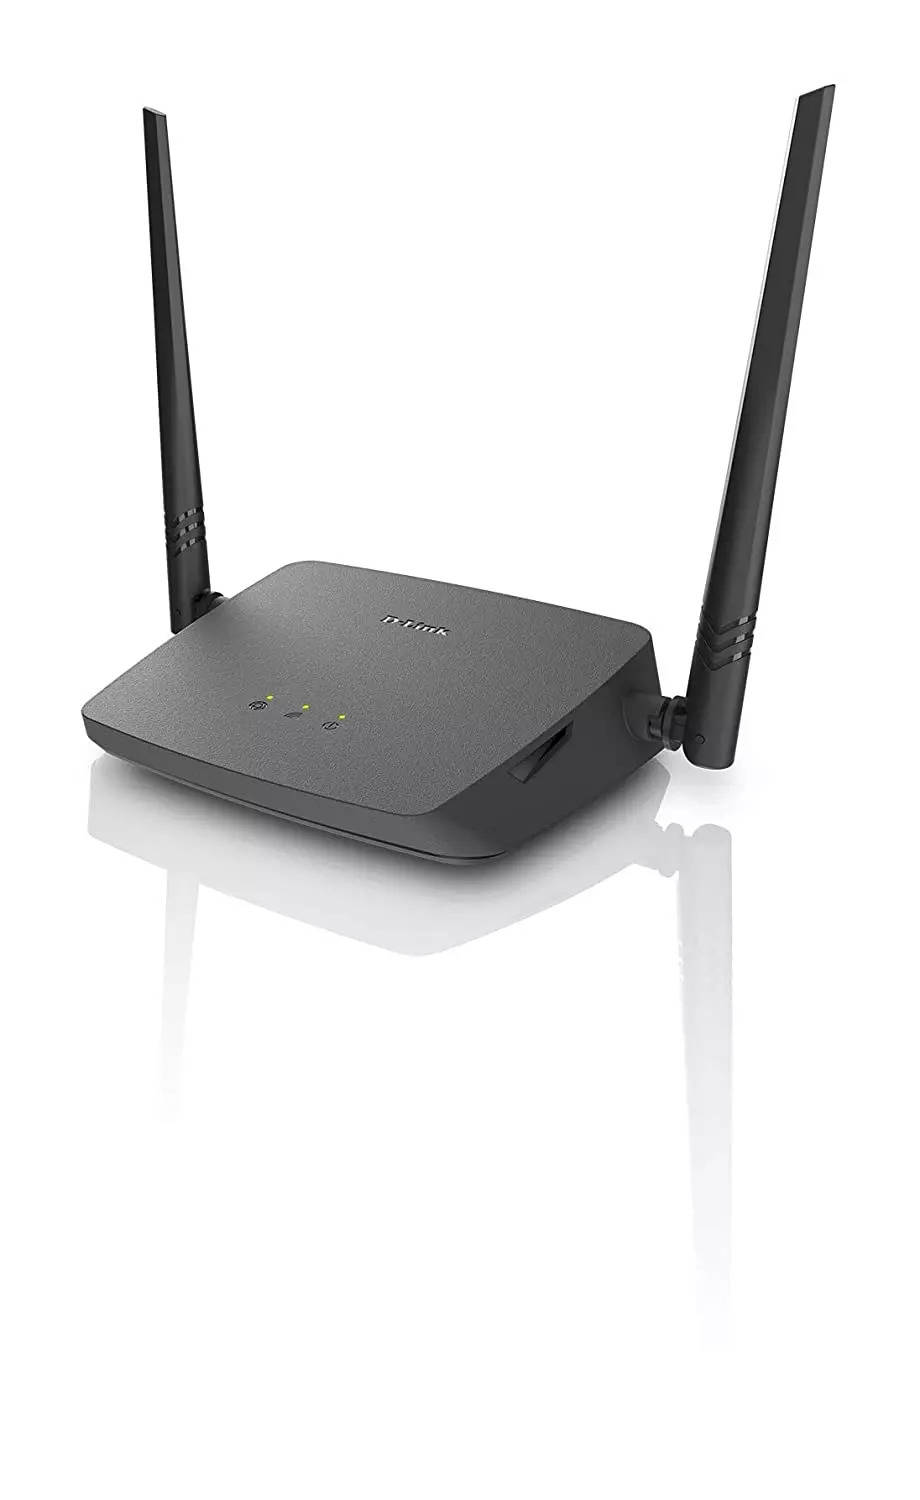 nål sej hjemme d-link wifi router: 6 Best D-Link Wi-fi Router for Home - The Economic Times